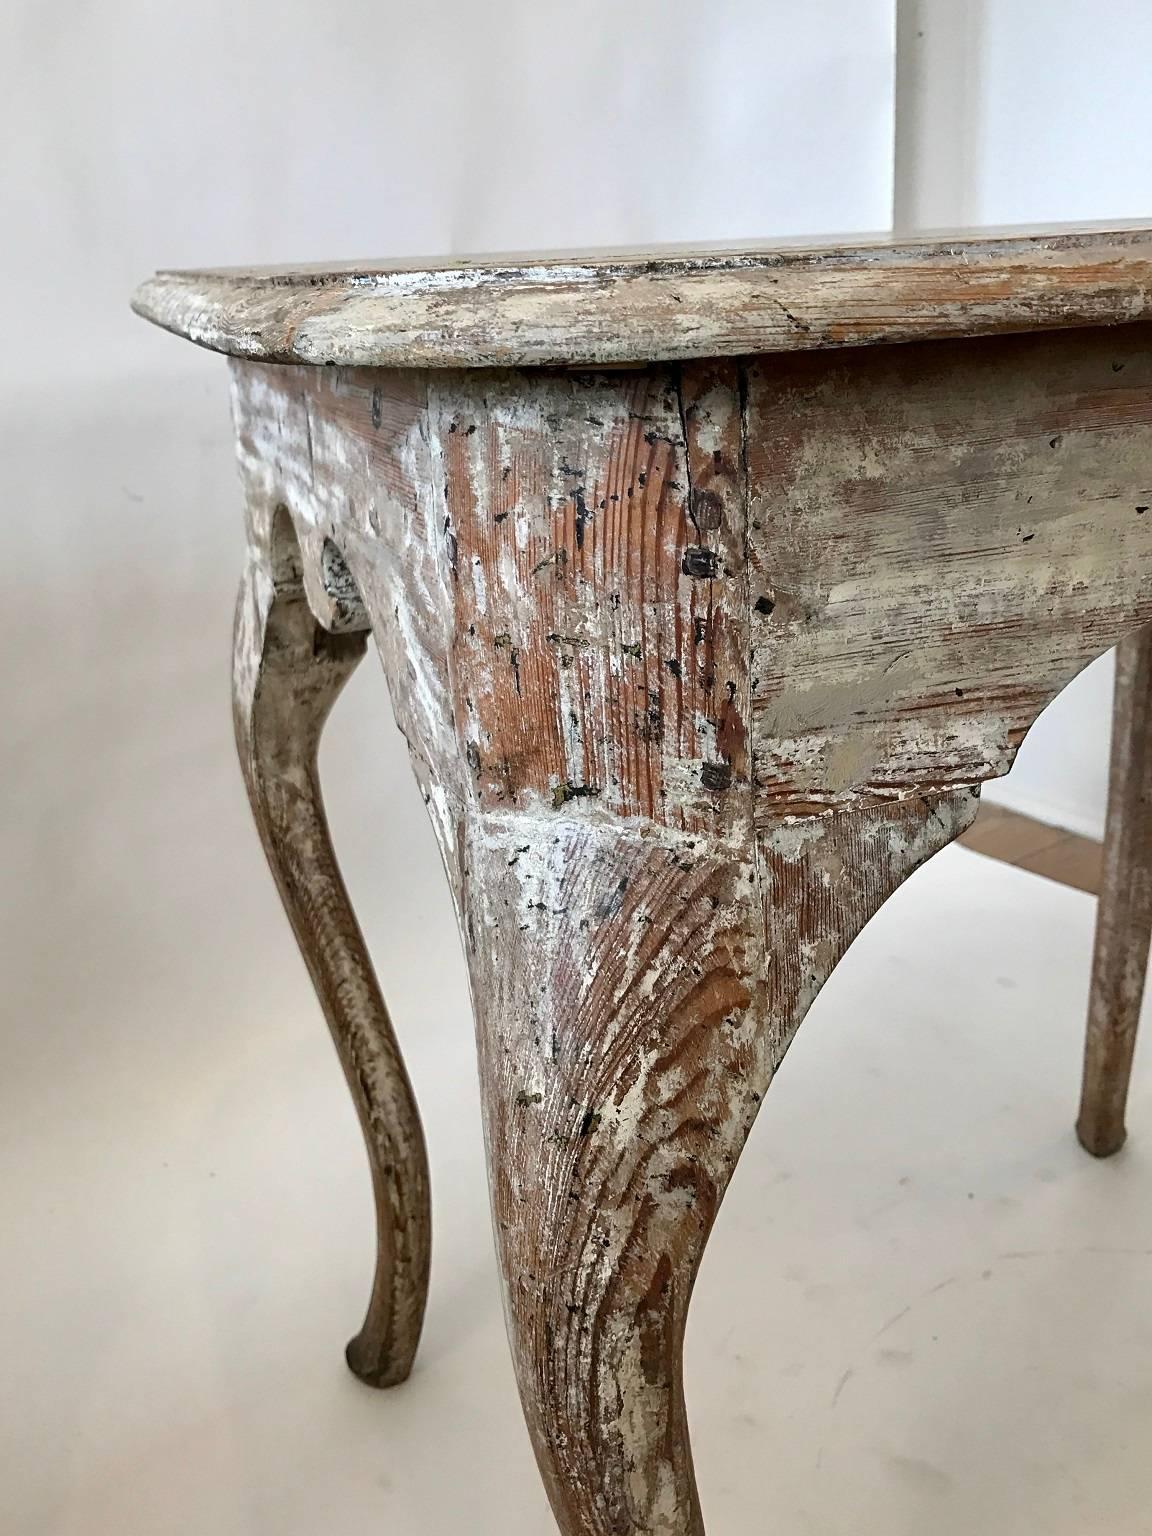 Elegantly formed 19th century Swedish Rococo tea table; shaped skirt; cabriole legs; later paint removed.